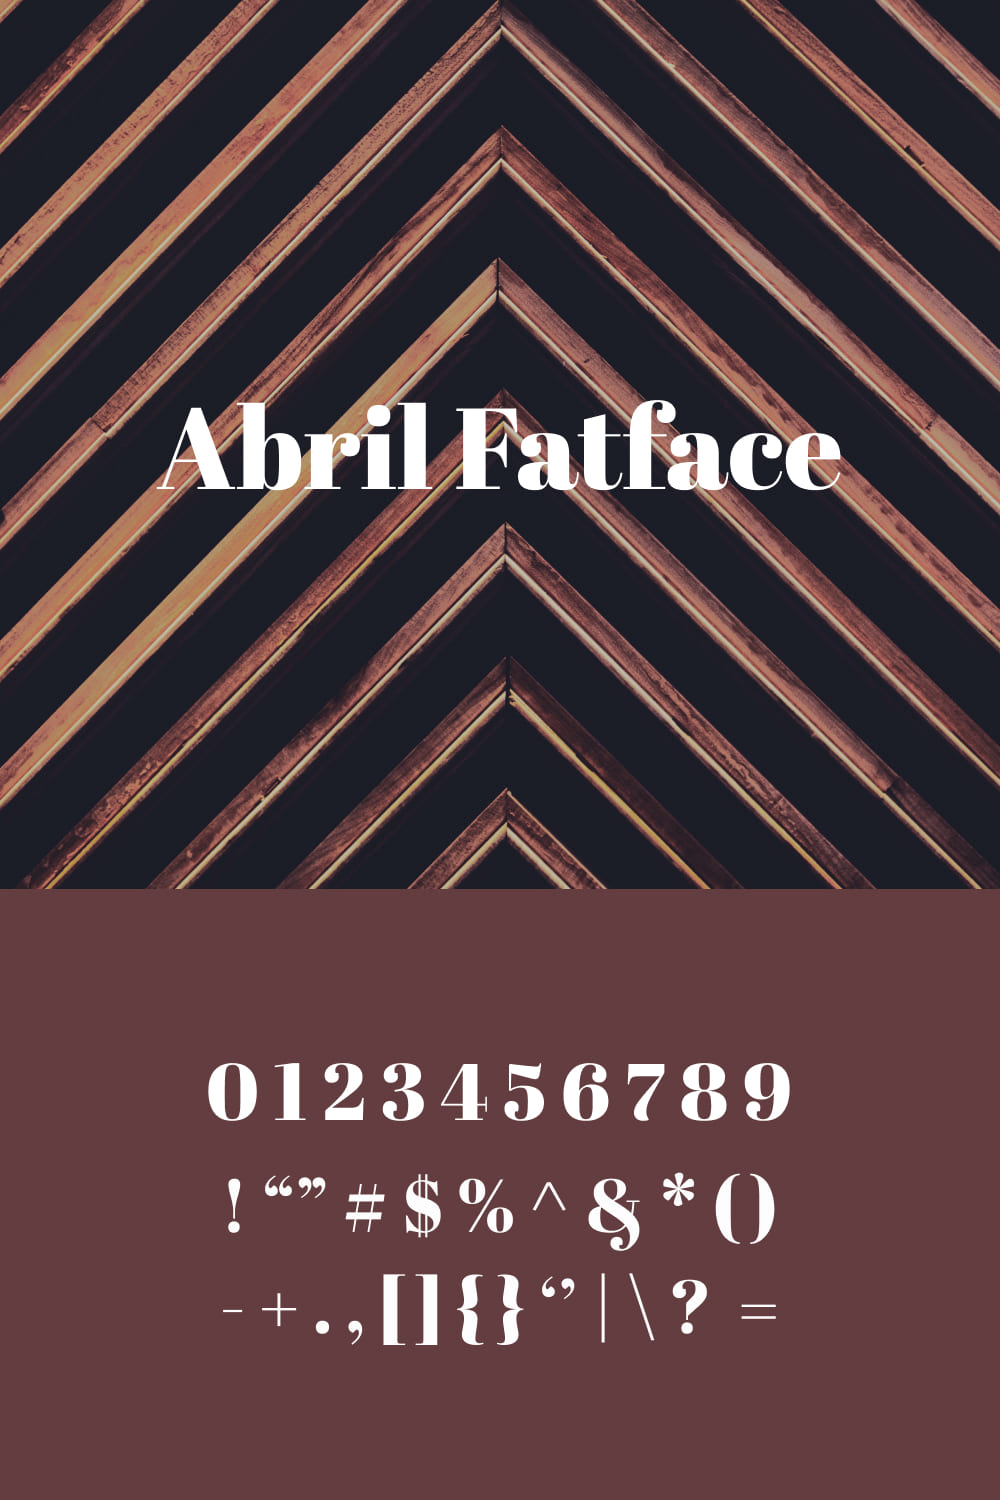 An example of a Abril Fatface font in white on a striped background.